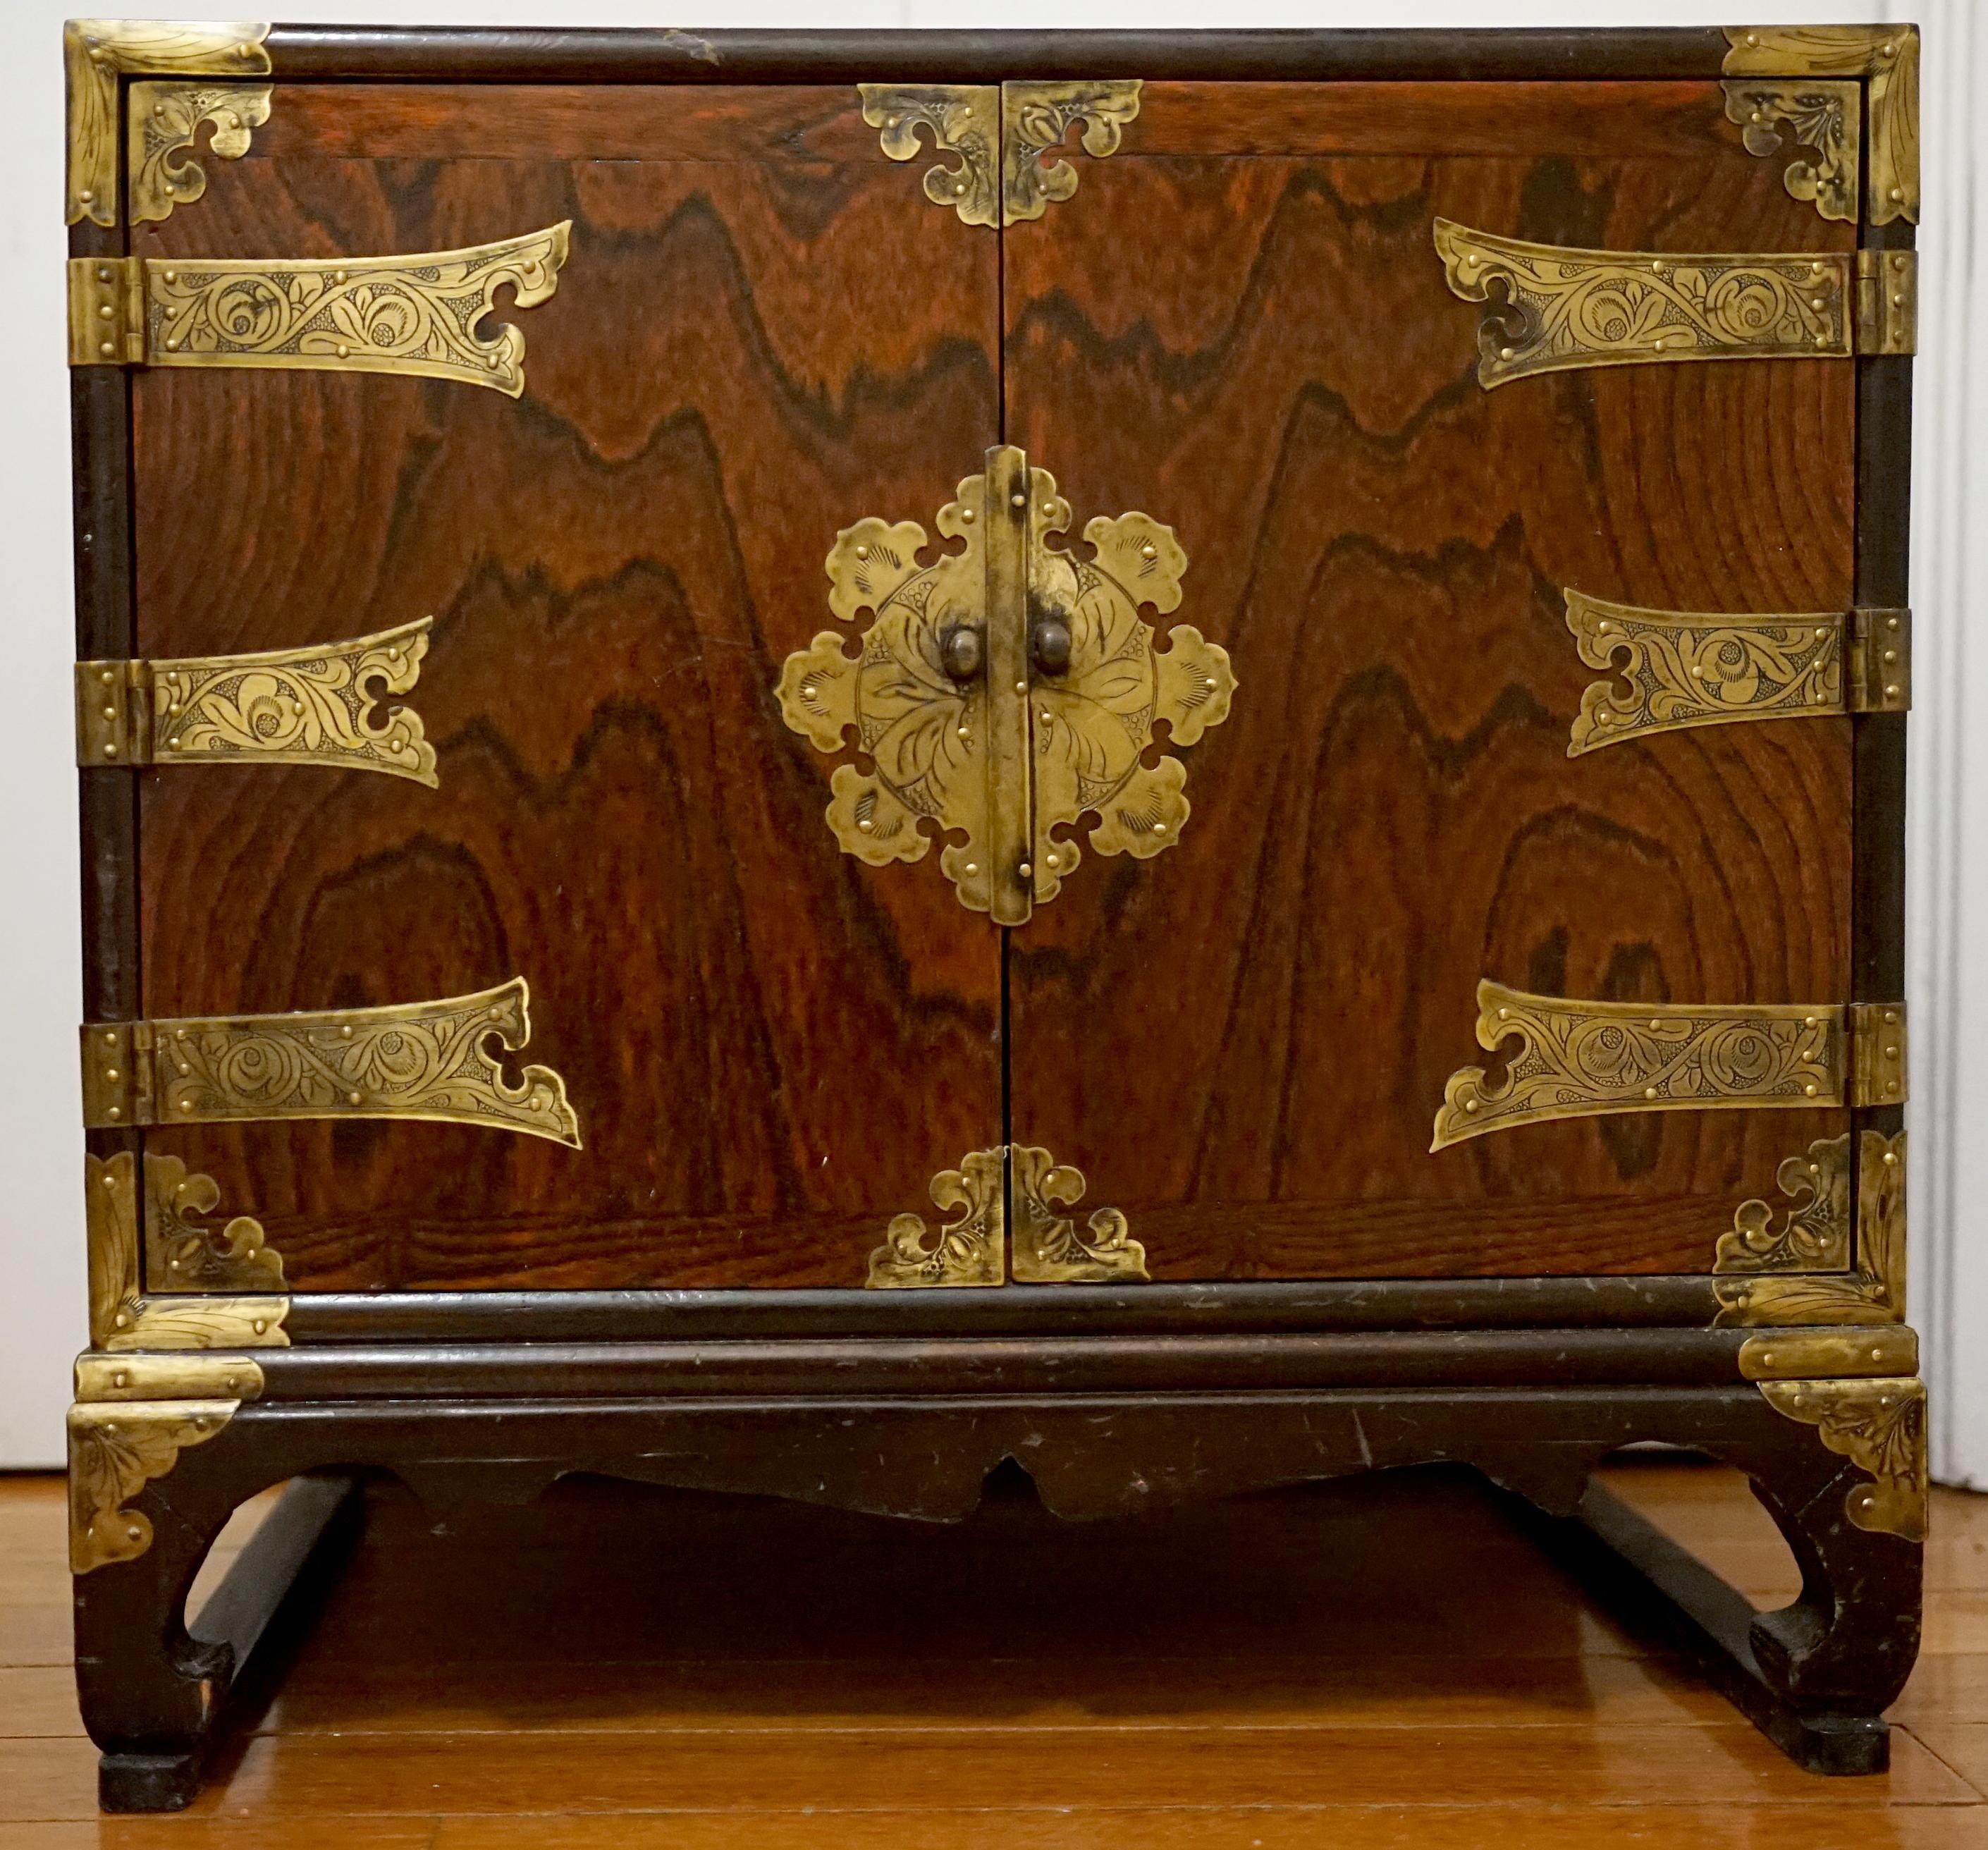 Vintage Burl Mahogany Tansu Chest with Paper Antique Calligraphy Lining For Sale 10